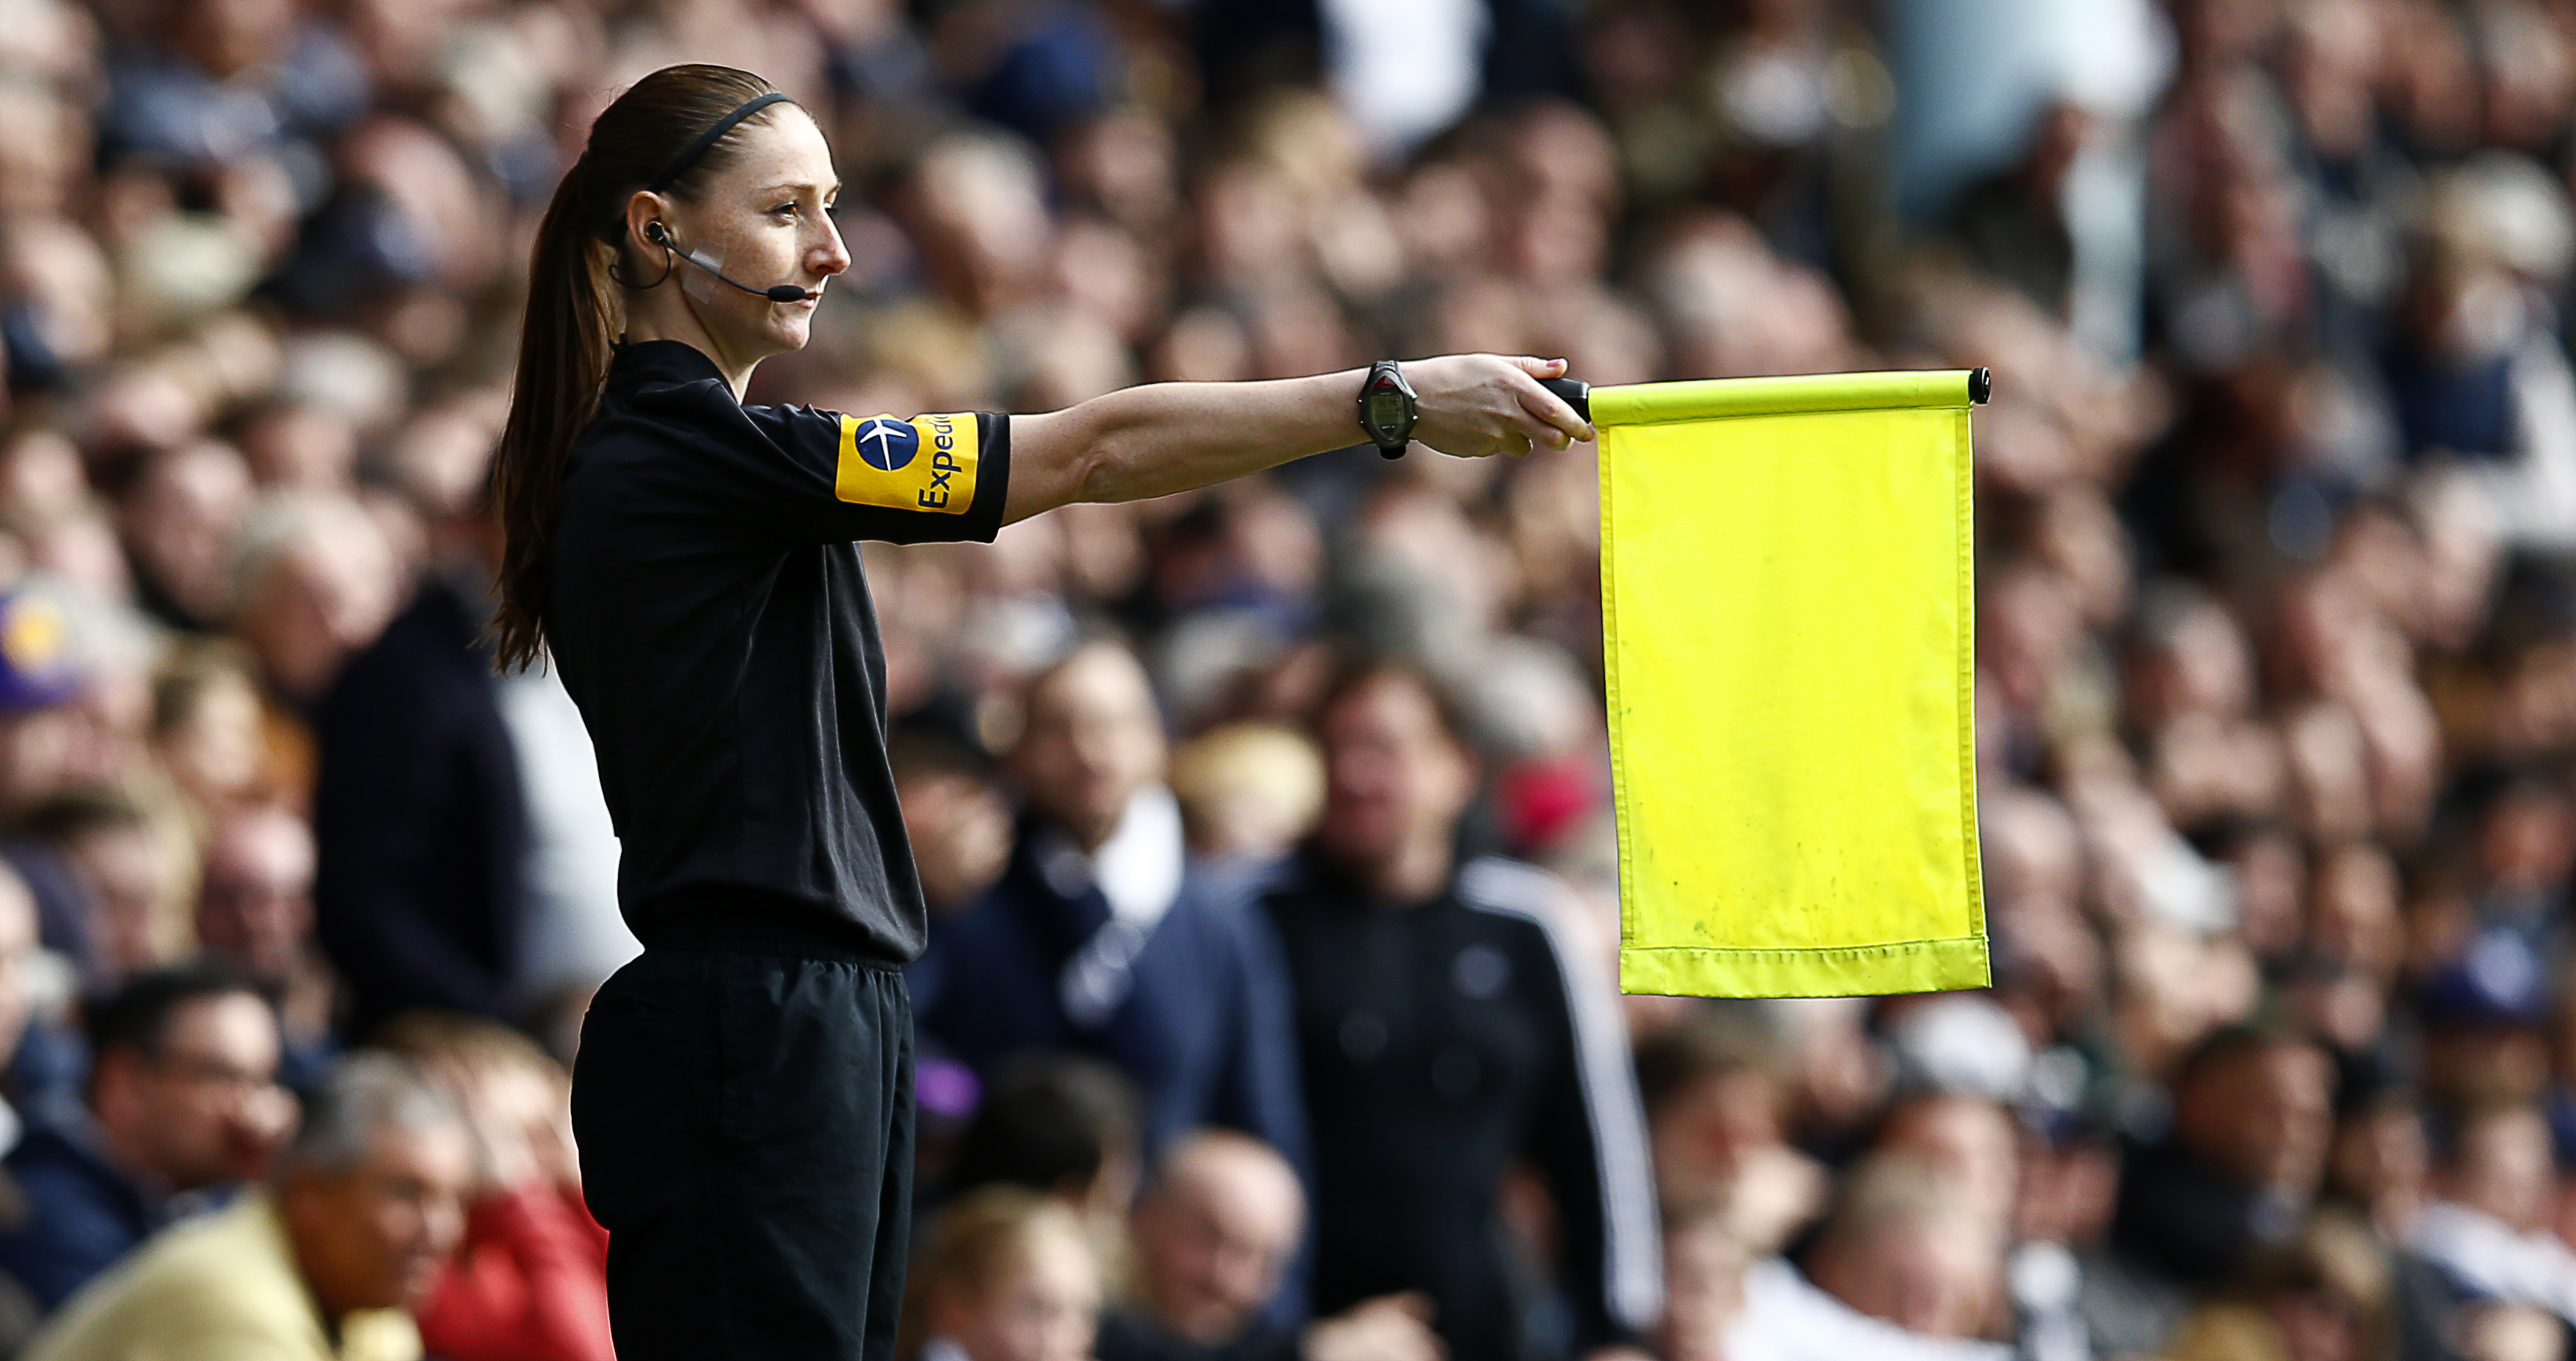 epa03652888 Female assistant referee Sian Massey waves the flag during the English Premier League soccer match between Tottenham Hotspur and Everton at the White Hart Lane in London, Britain, 07 April 2013. The match ended 2-2.  EPA/KERIM OKTEN DataCo terms and conditions apply. https://www.epa.eu/downloads/DataCo-TCs.pdf